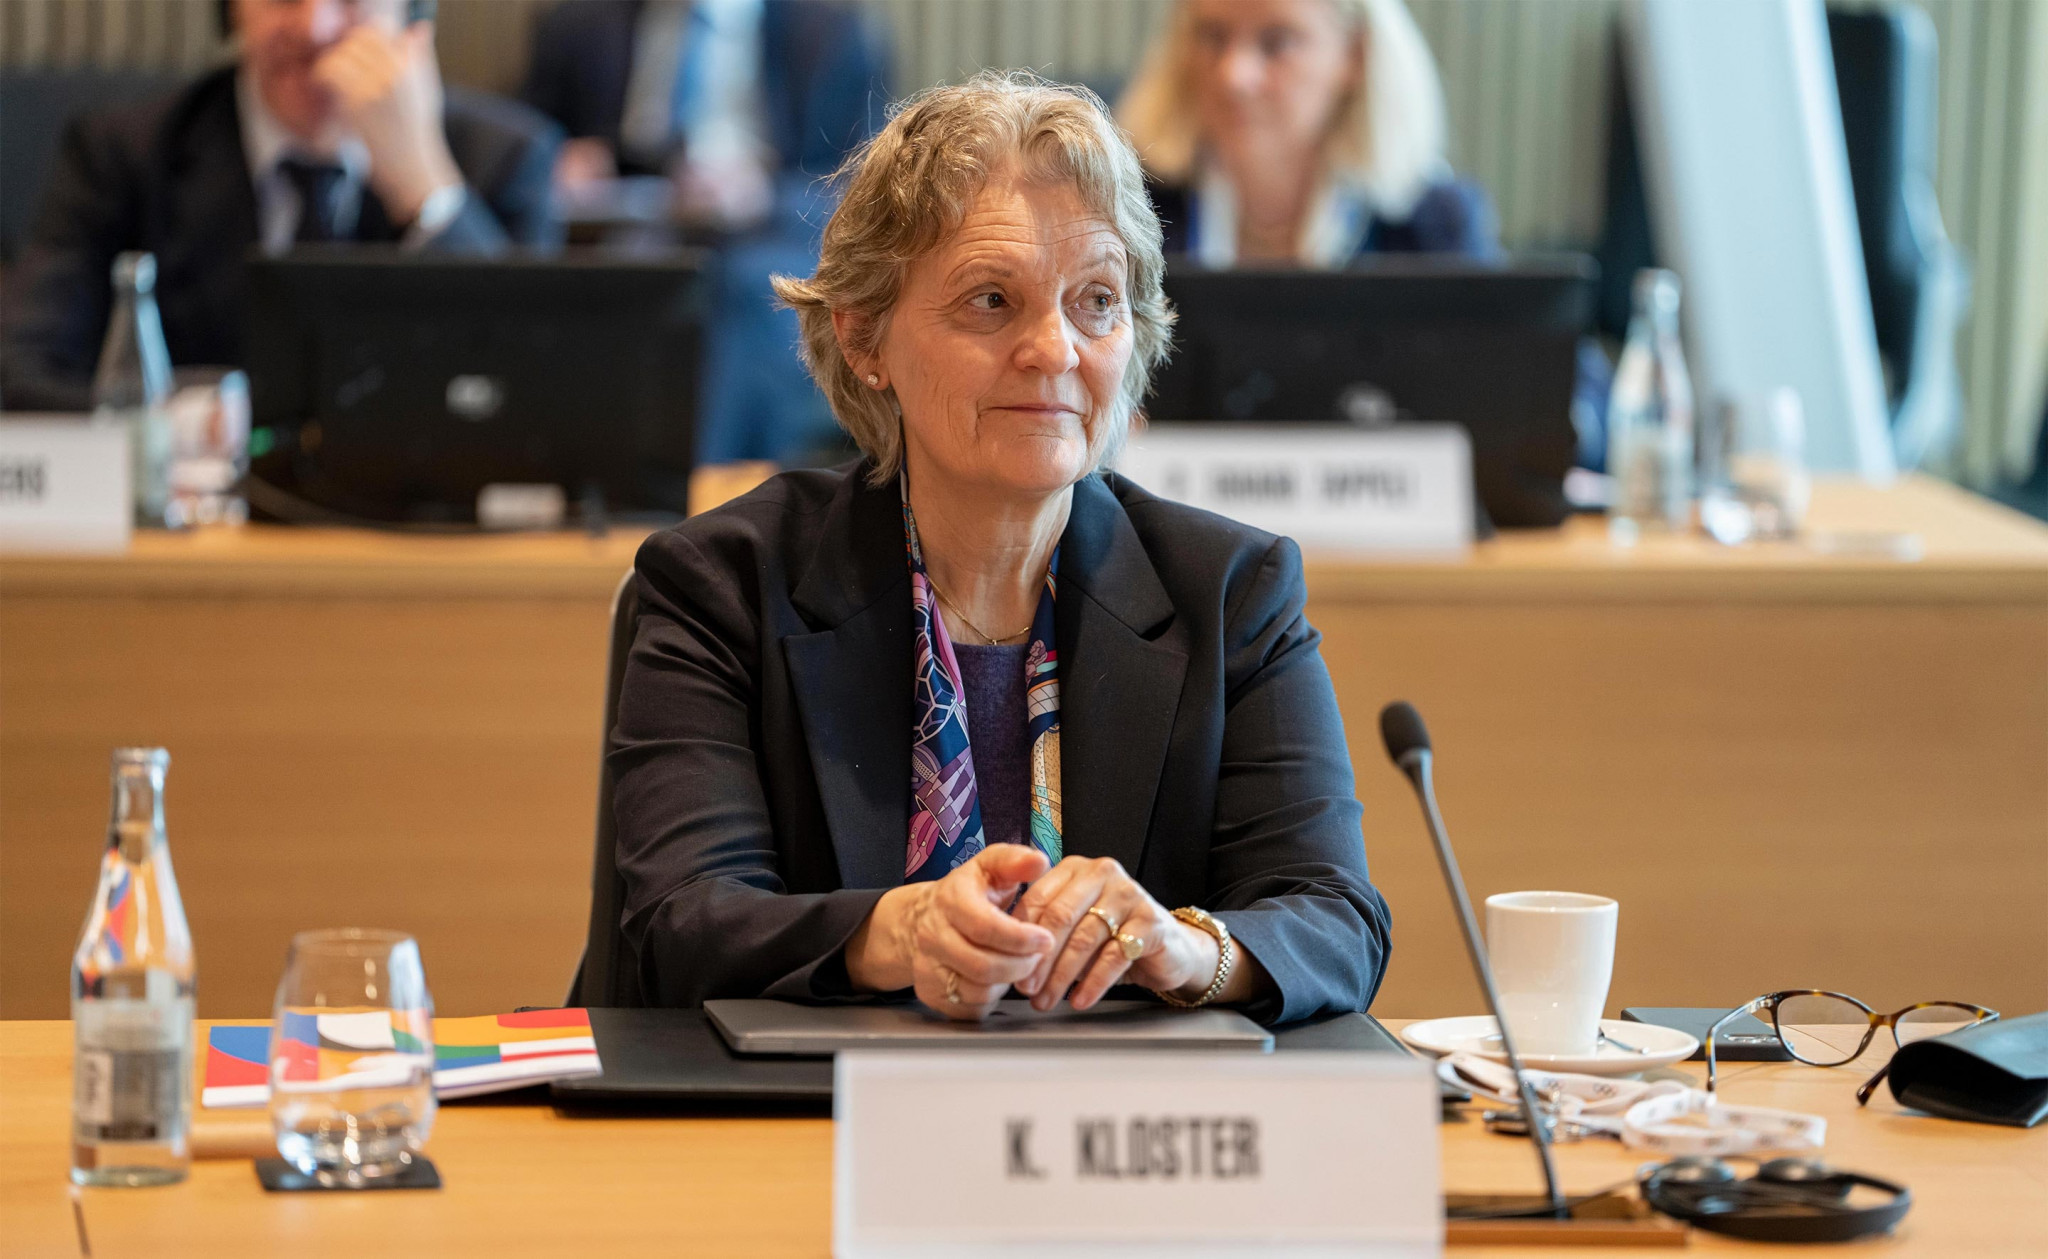 IOC Executive Board member Kristin Kloster of Norway will chair the Coordination Commission for the Milan Cortina 2026 Winter Olympics and Paralympics ©IOC